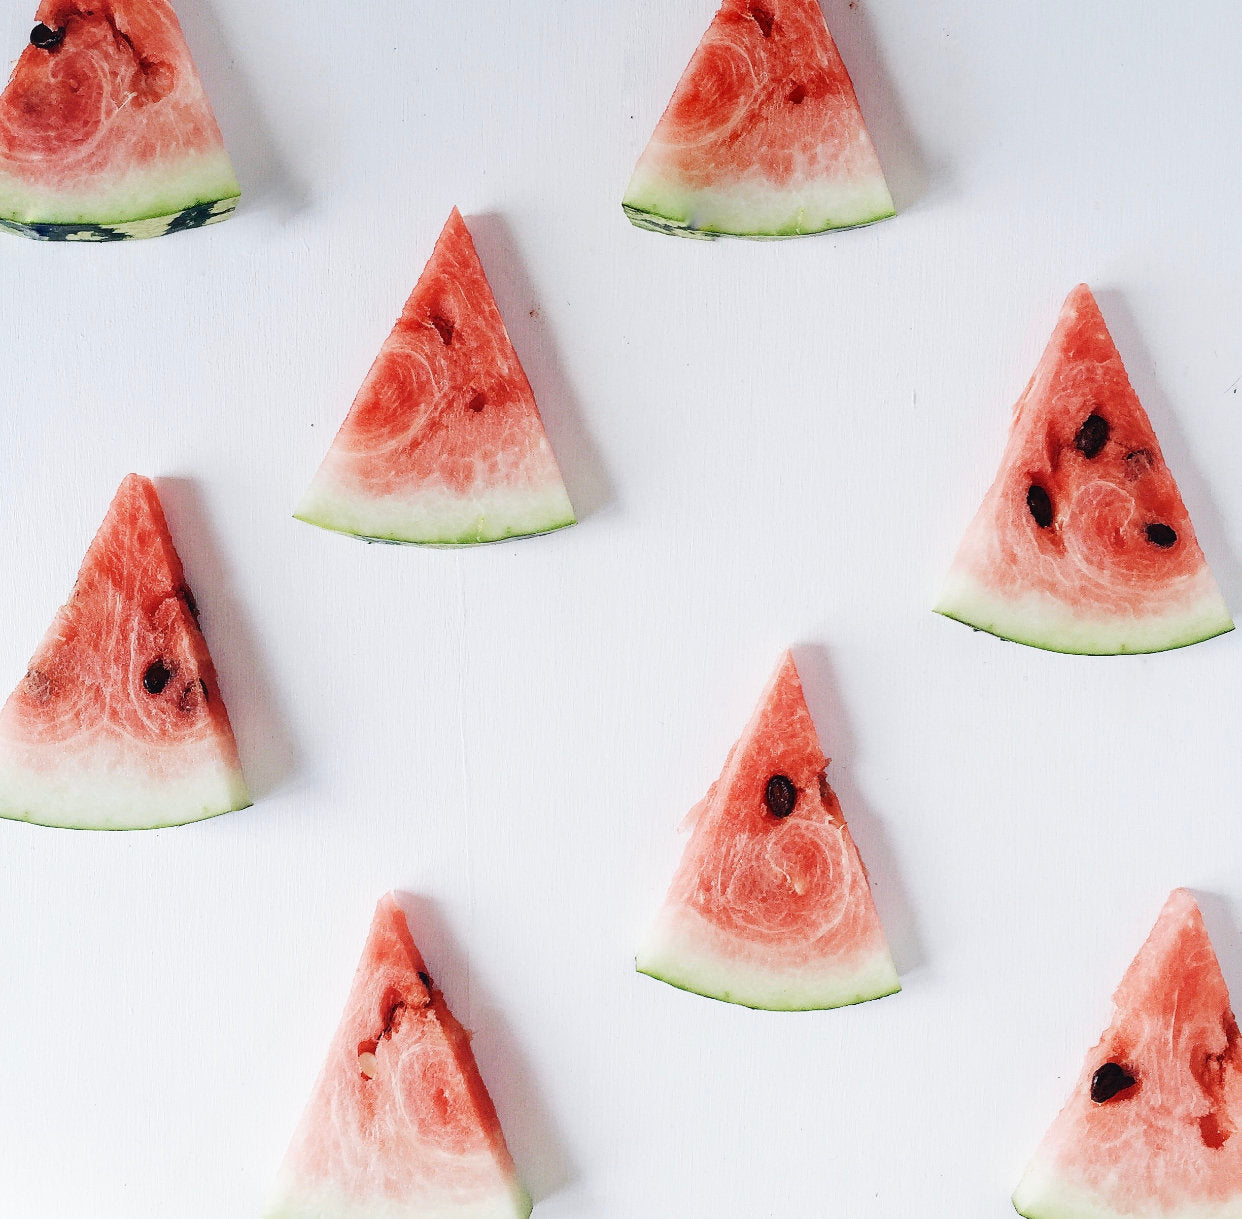 Dehydrated Watermelon slices